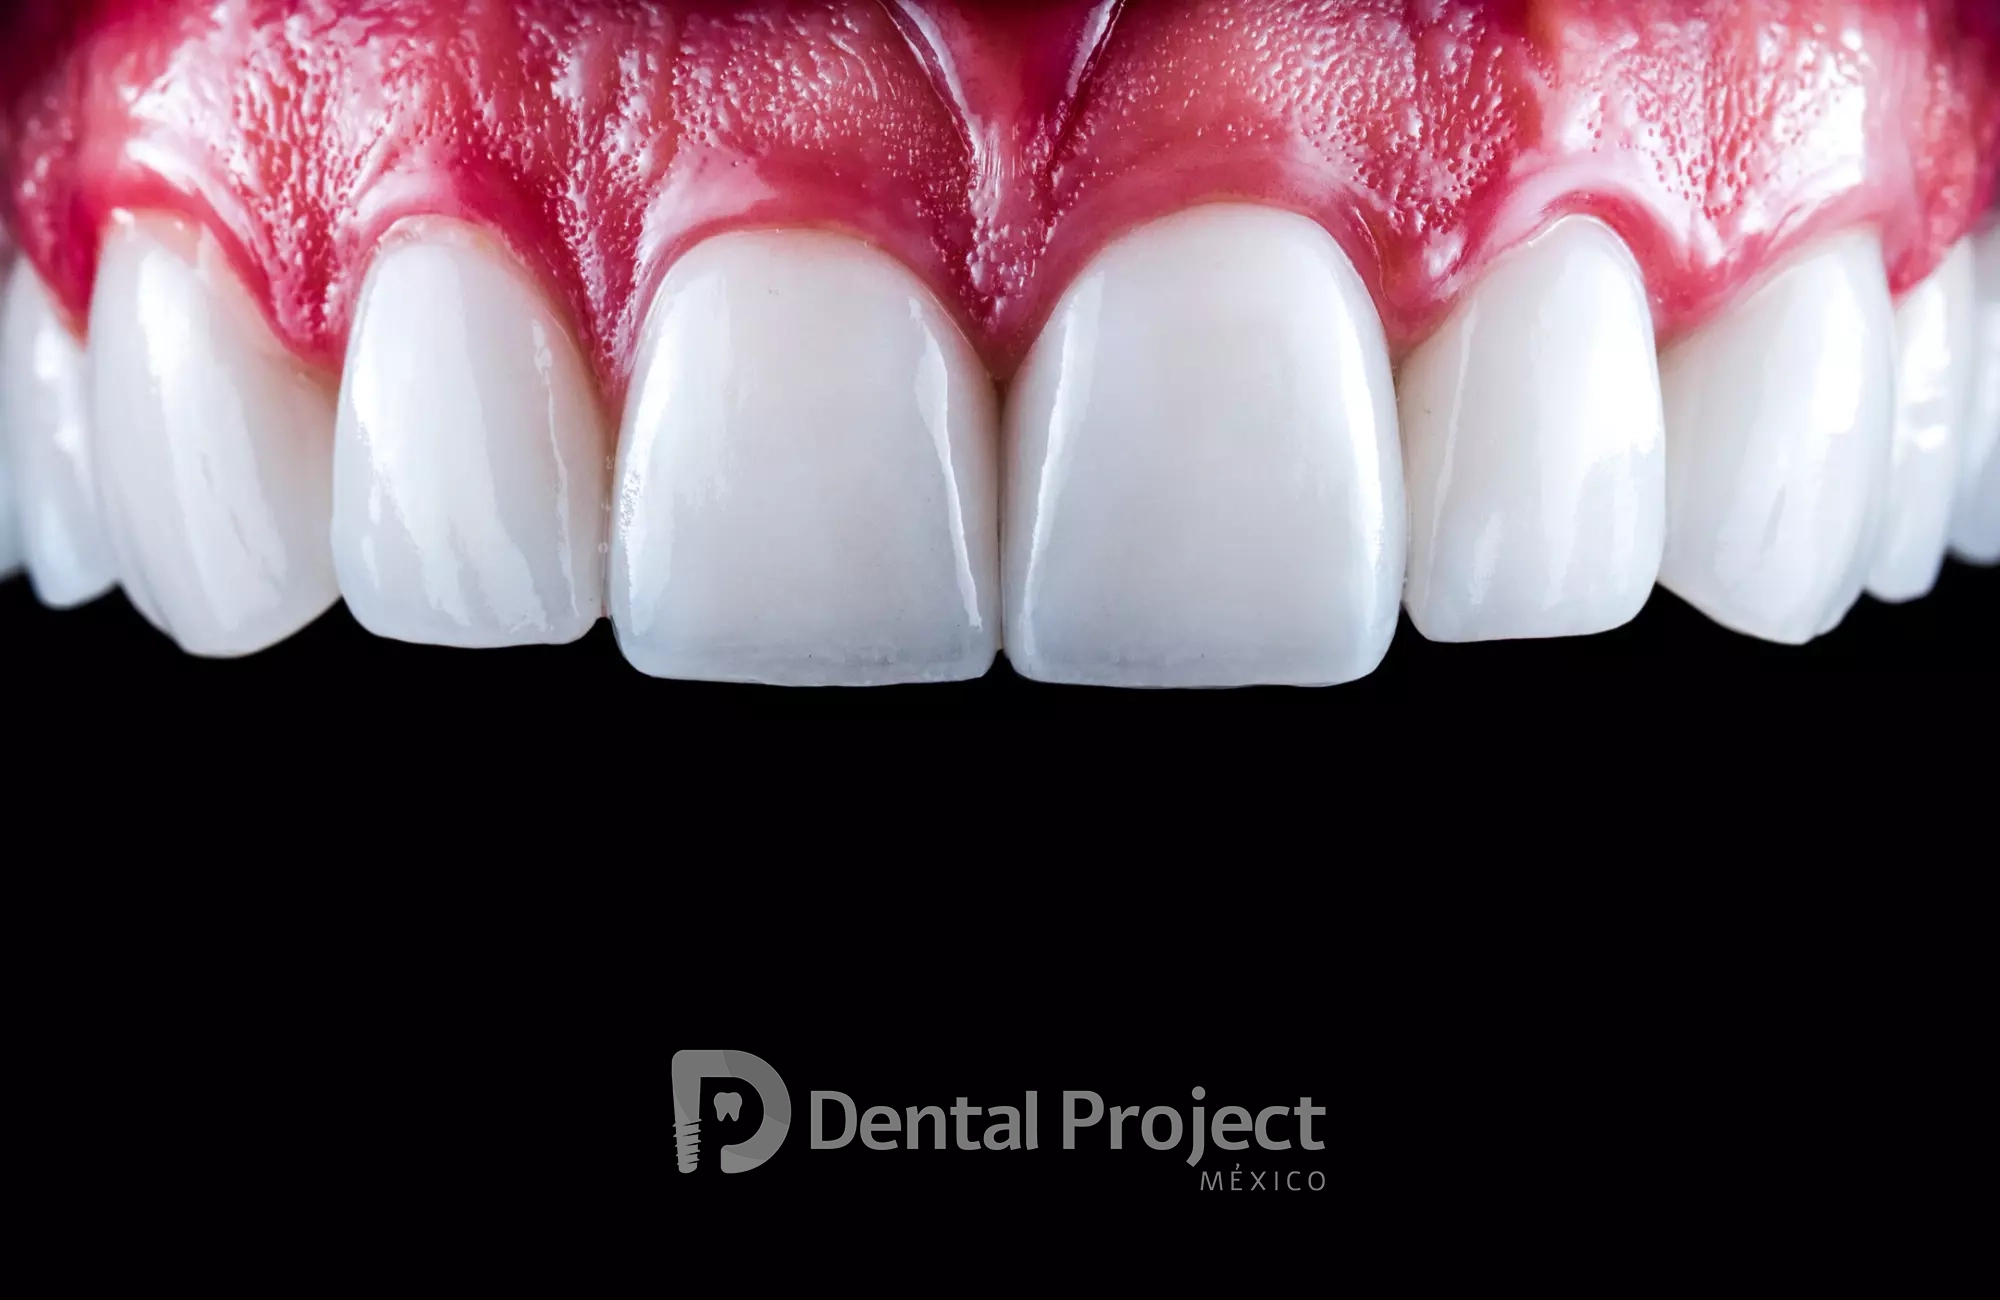 Dental Project Mexico Cosmetic Dentistry.